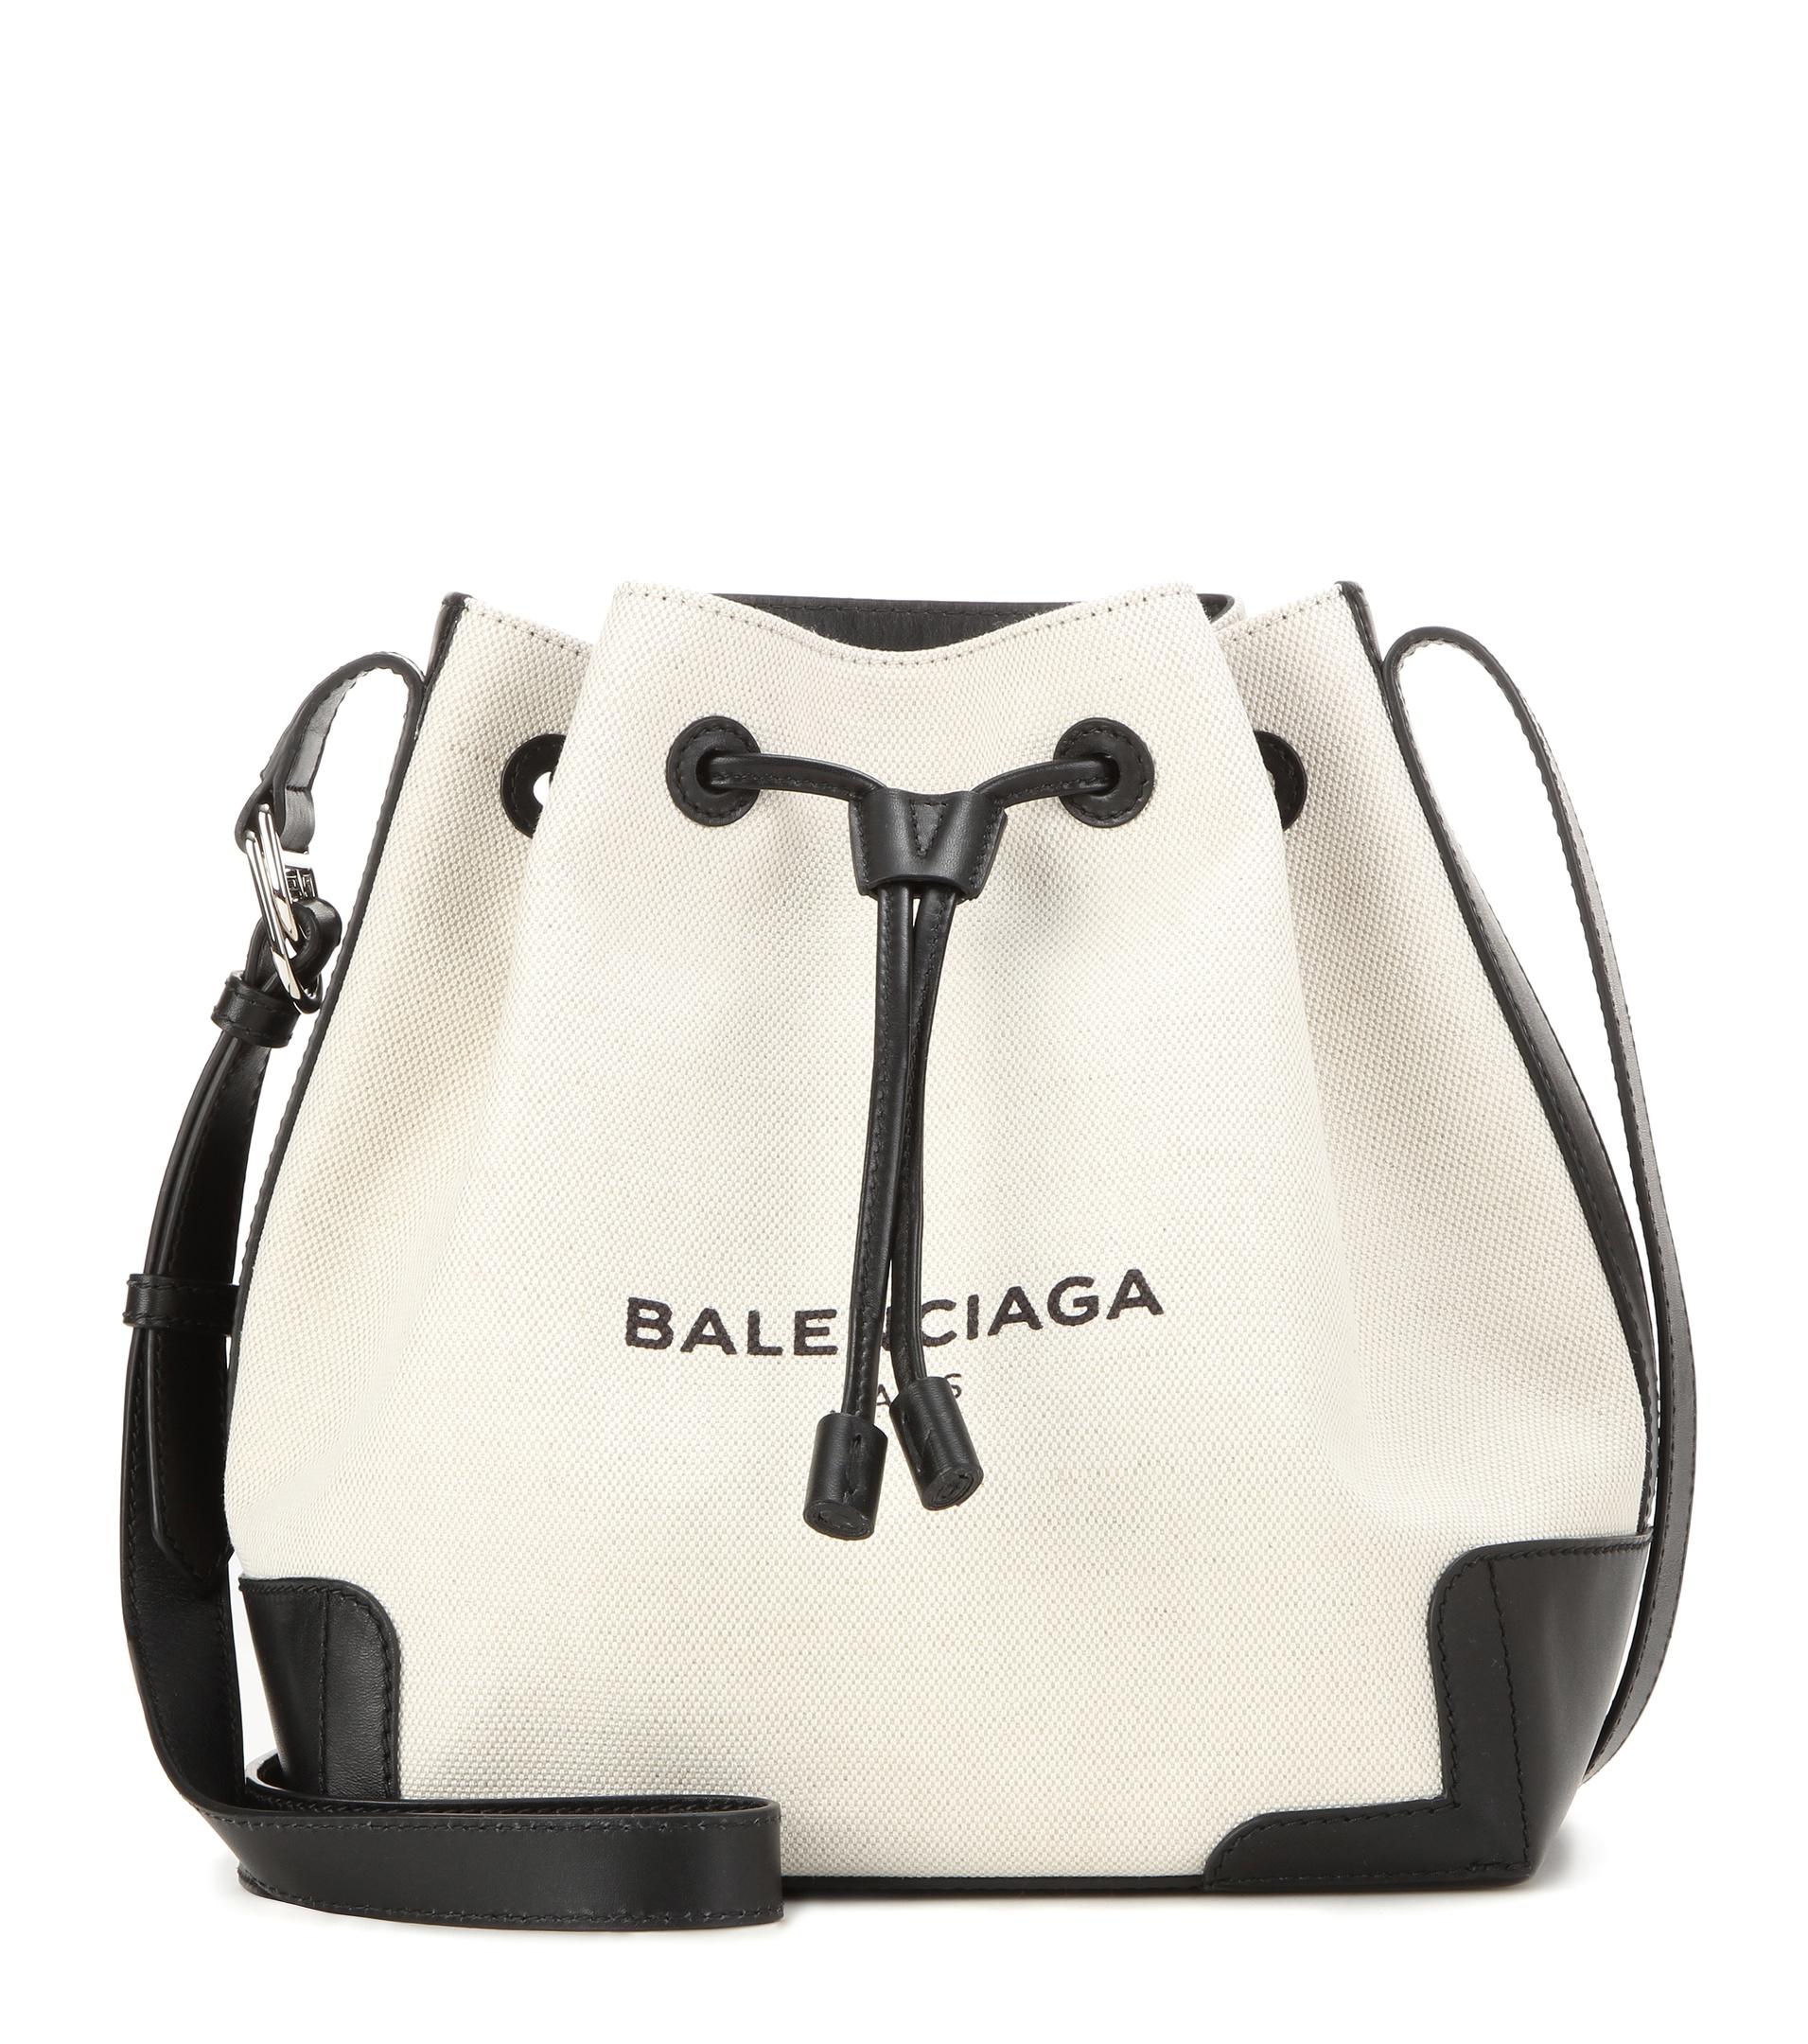 Balenciaga Canvas And Leather Bucket Bag in White - Lyst